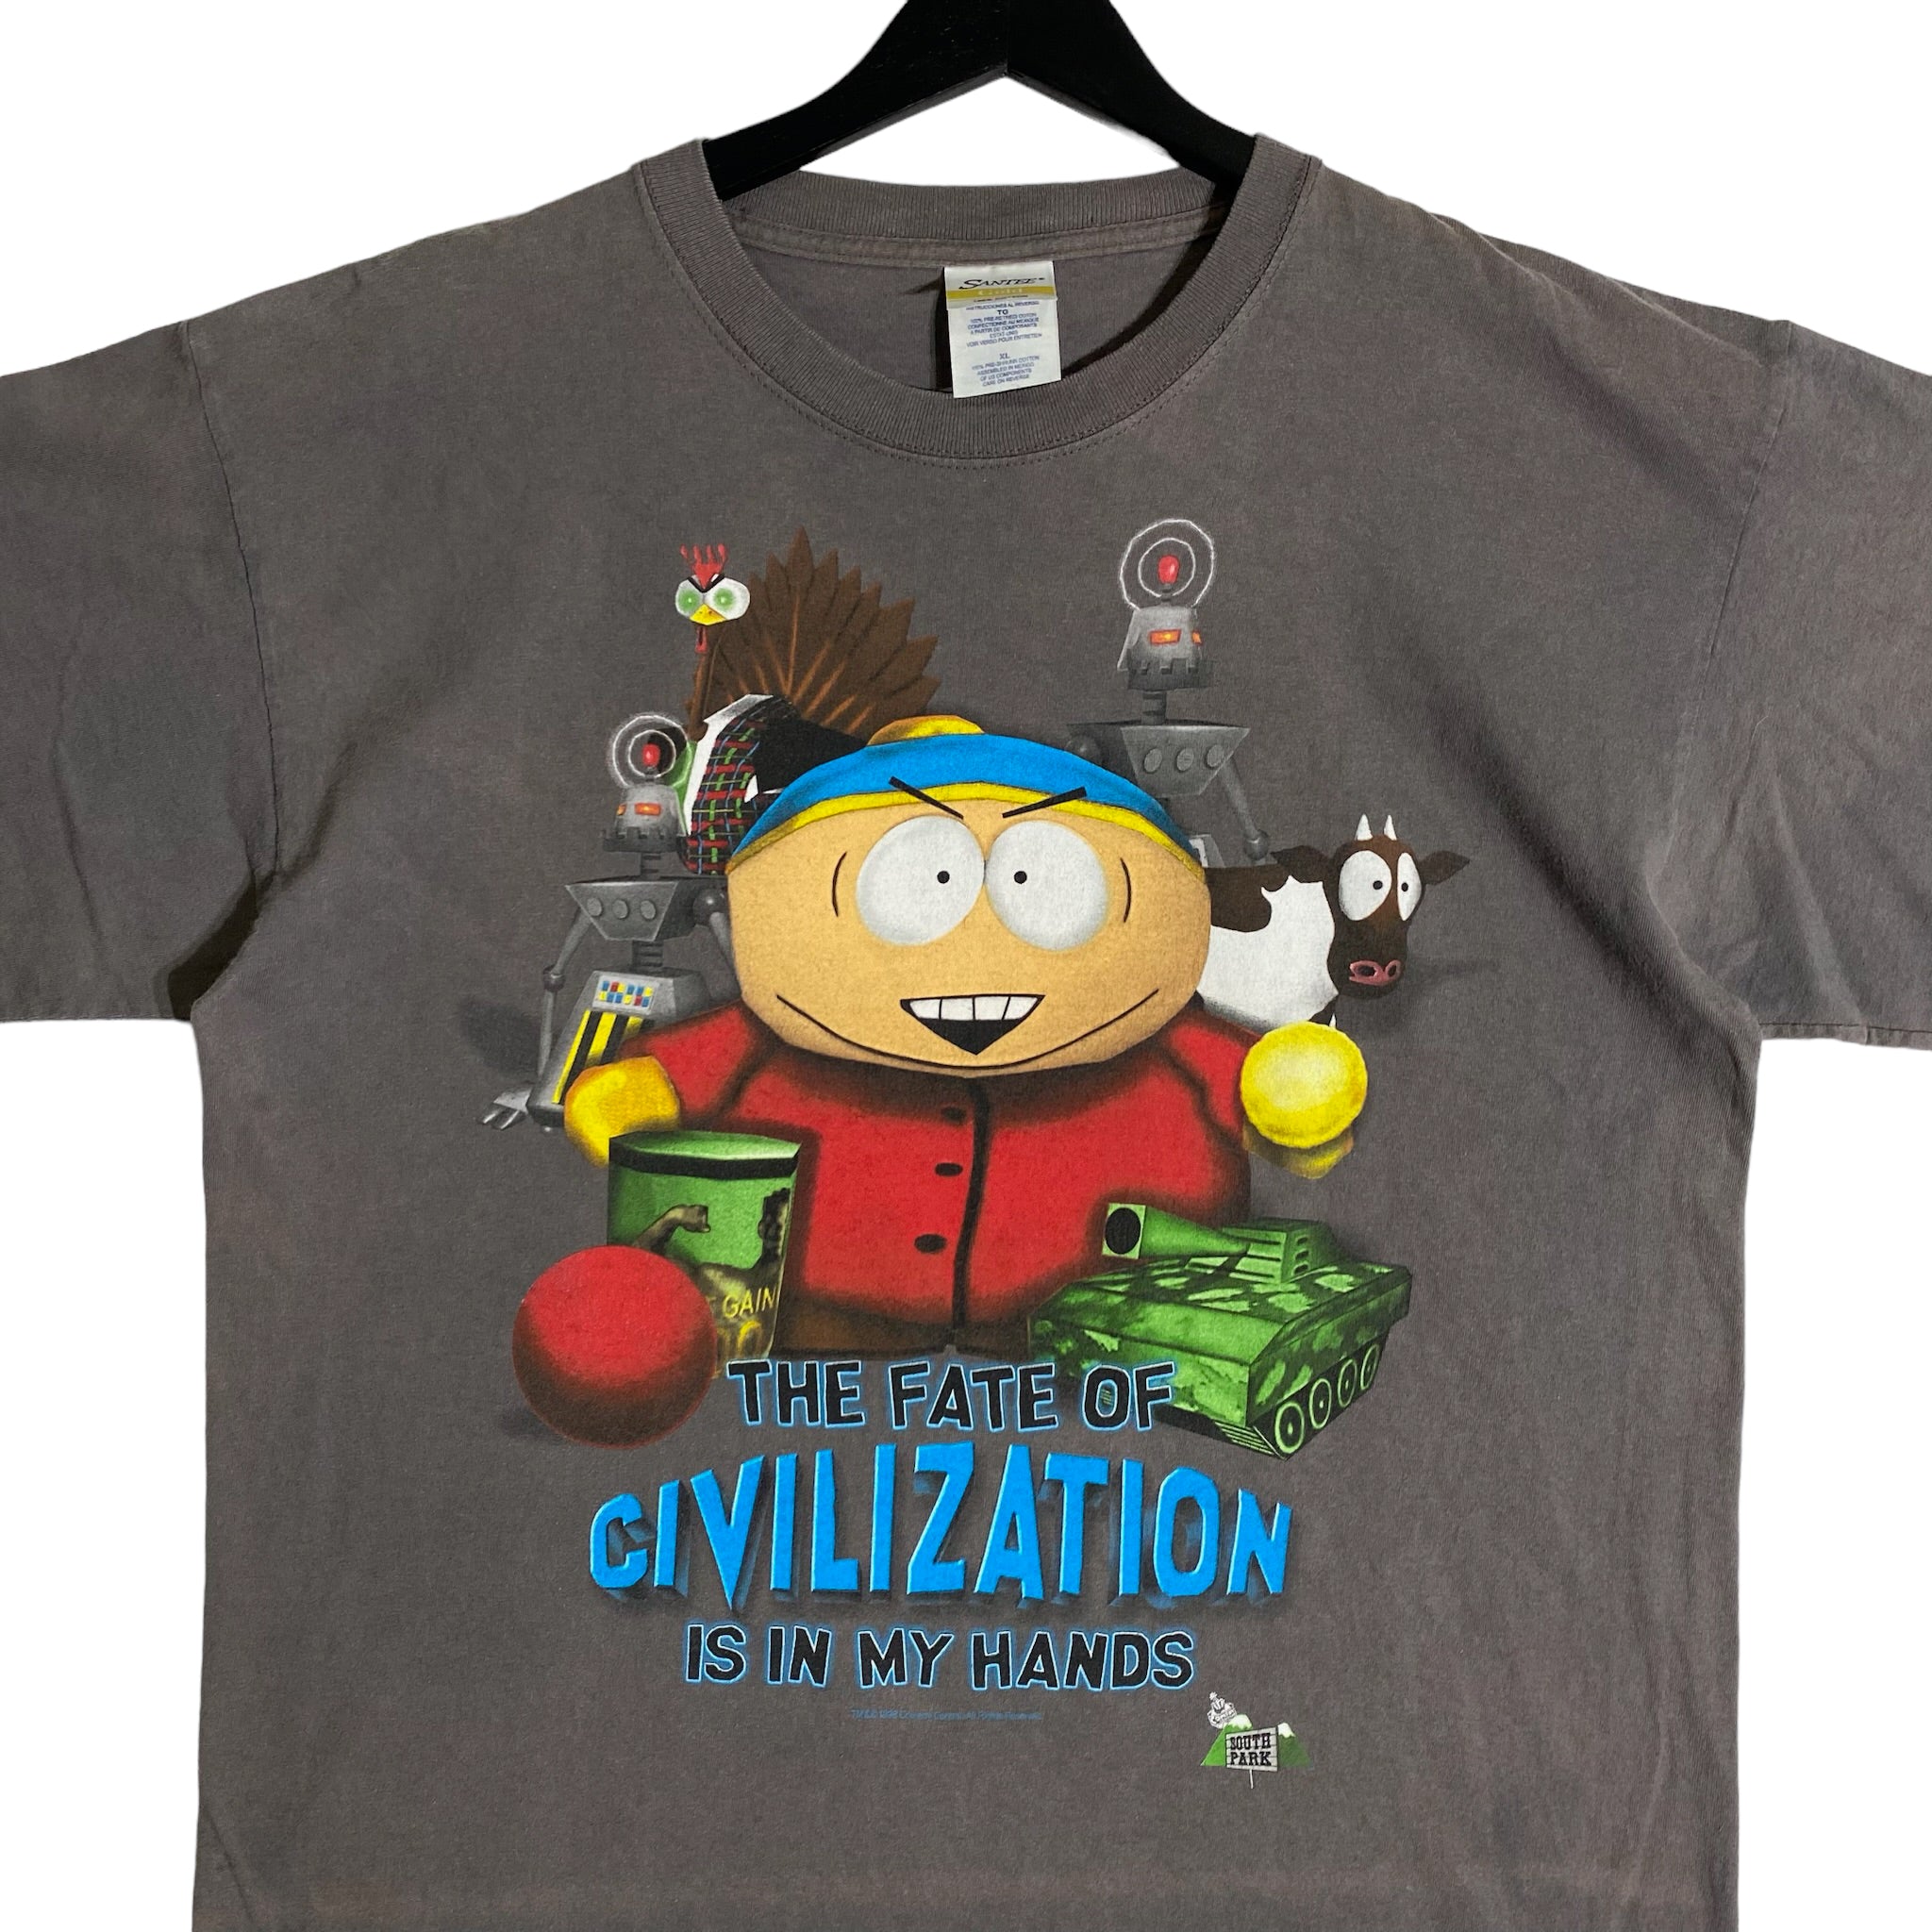 Vintage South Park Cartman "The Fate Of Civilization Is In My Hands" Shirt 1998